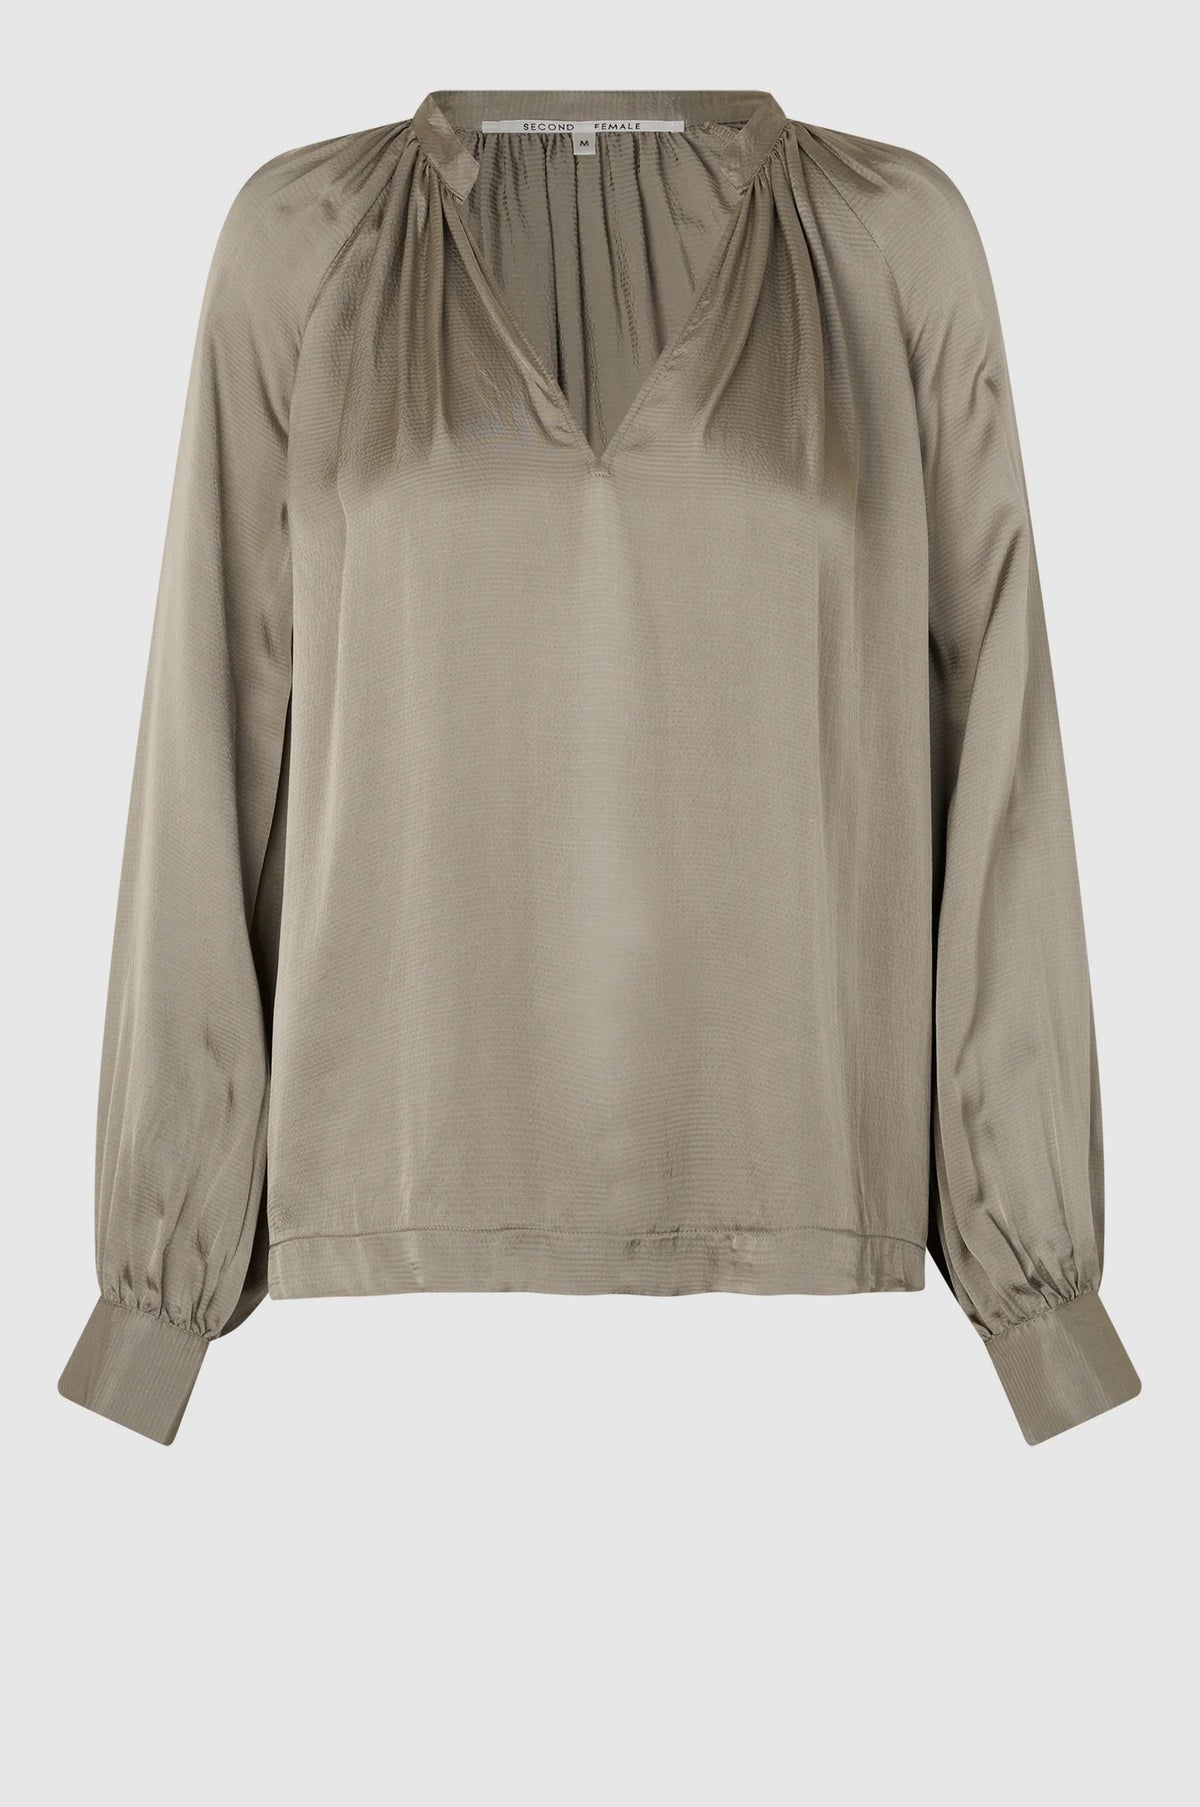 Taupe textured satin pull on top with long sleeves and gathered notch neck